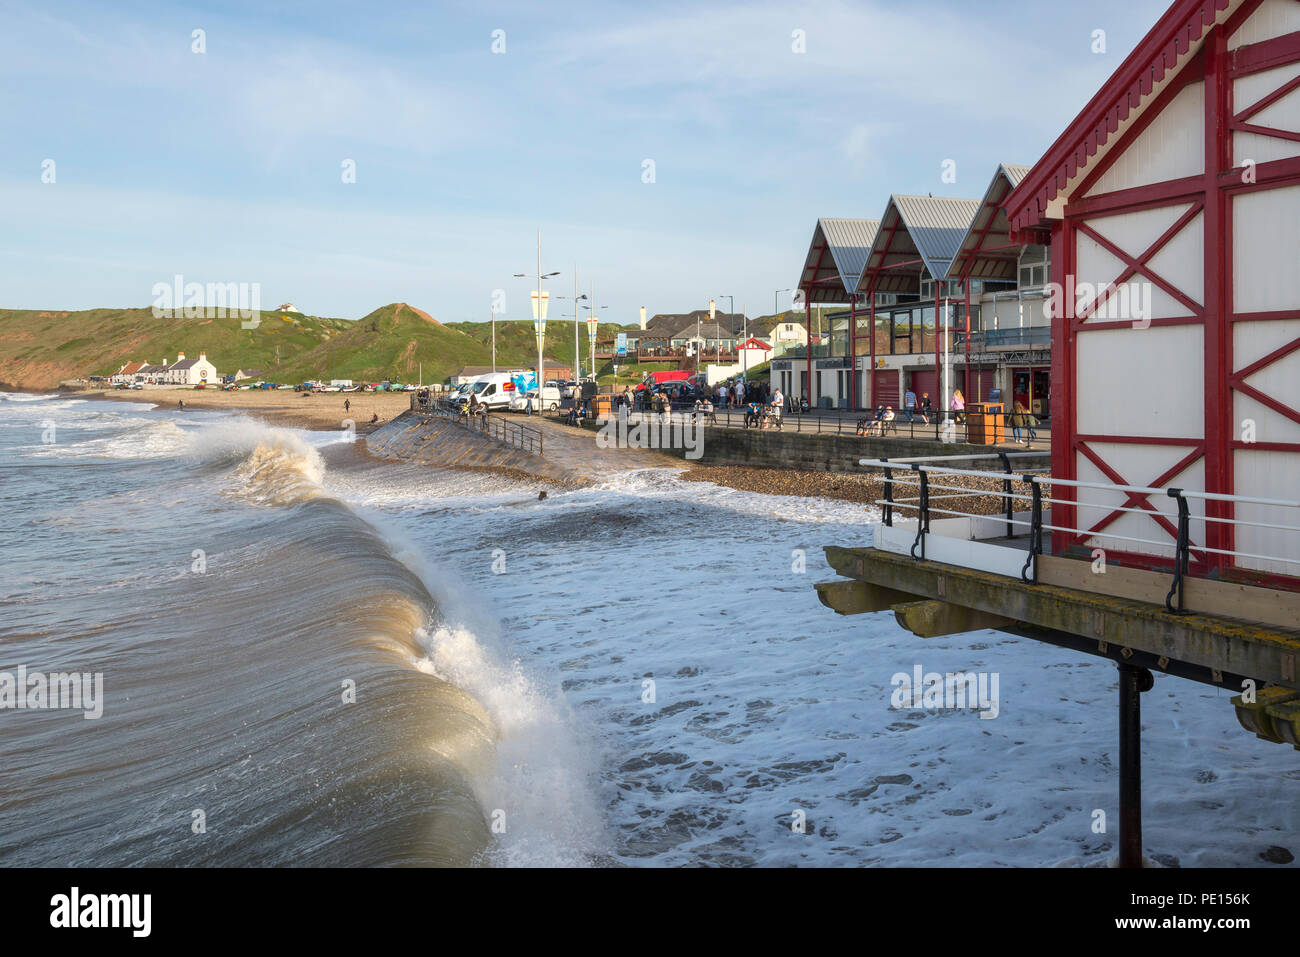 Waves breaking against the promenade at Saltburn-by-the-sea, North Yorkshire, England. A sunny spring afternoon with lots of people enjoying the view. Stock Photo